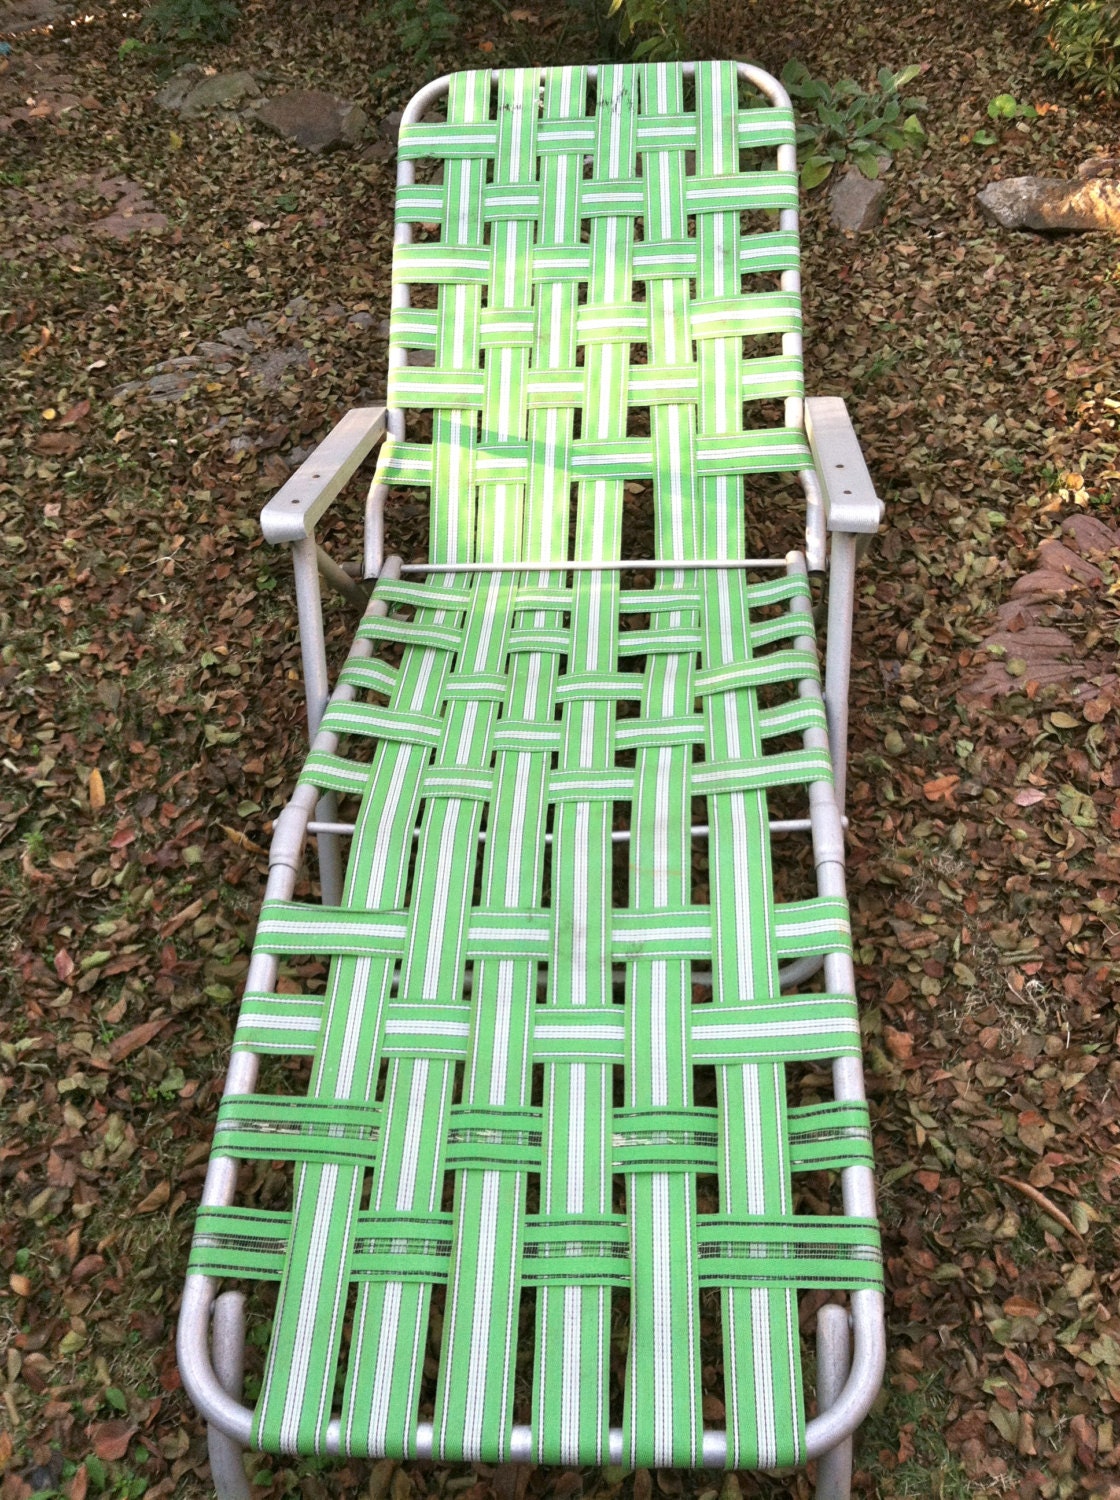 Childs lawn chair aluminum frame plastic webbing